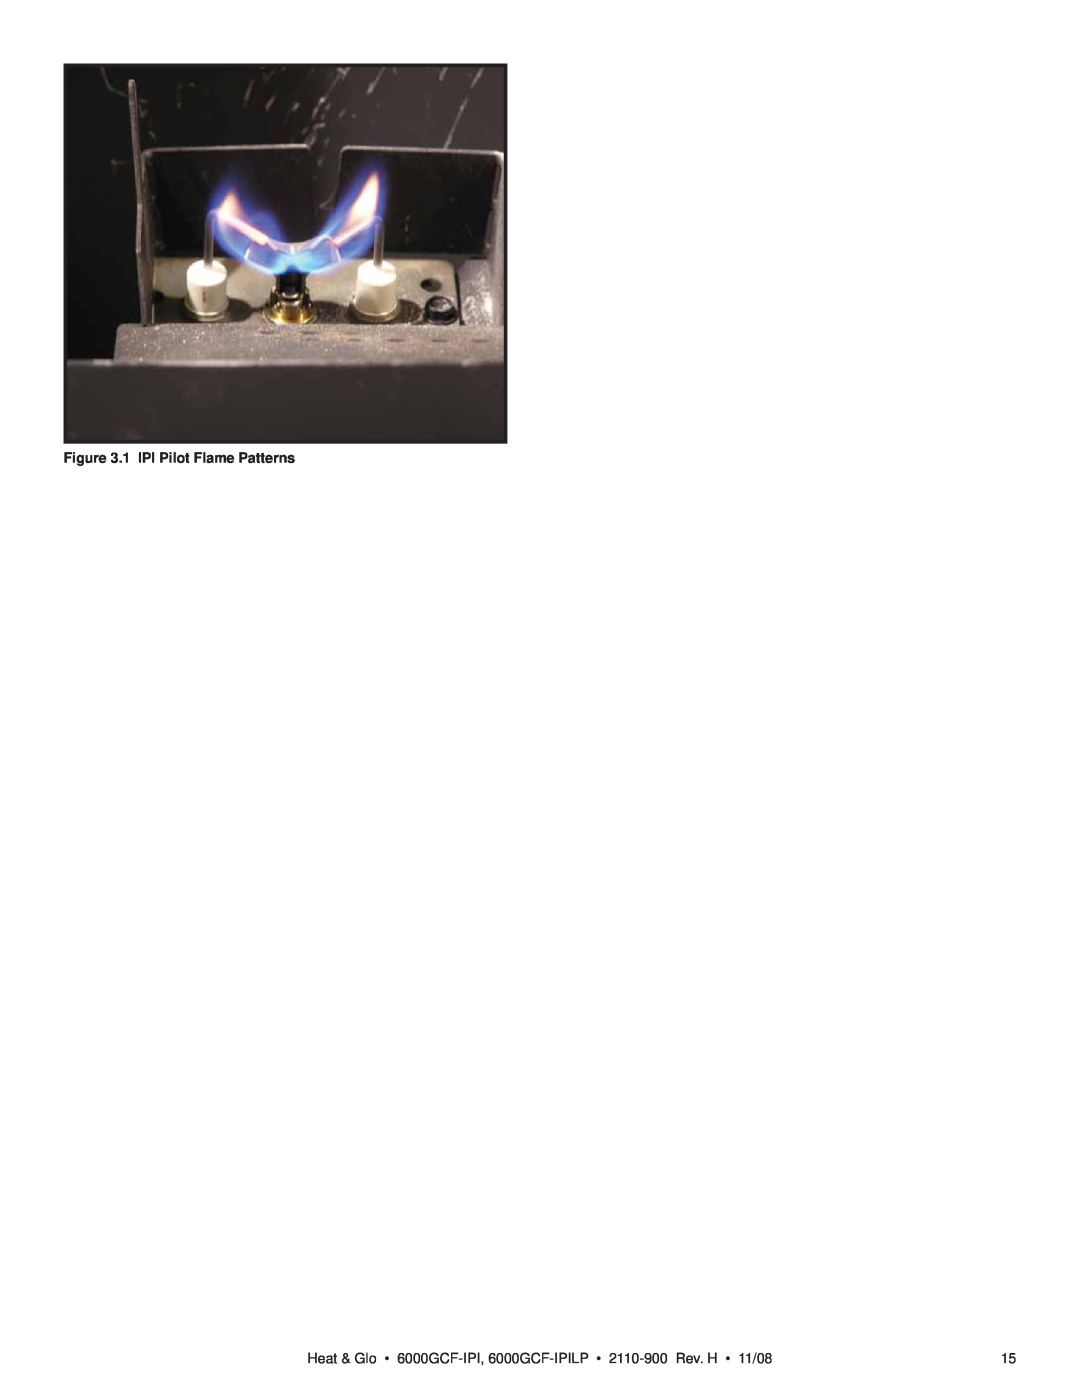 Hearth and Home Technologies 6000GCF-IPIL owner manual Either cobrahead or SIT, 1 IPI Pilot Flame Patterns 